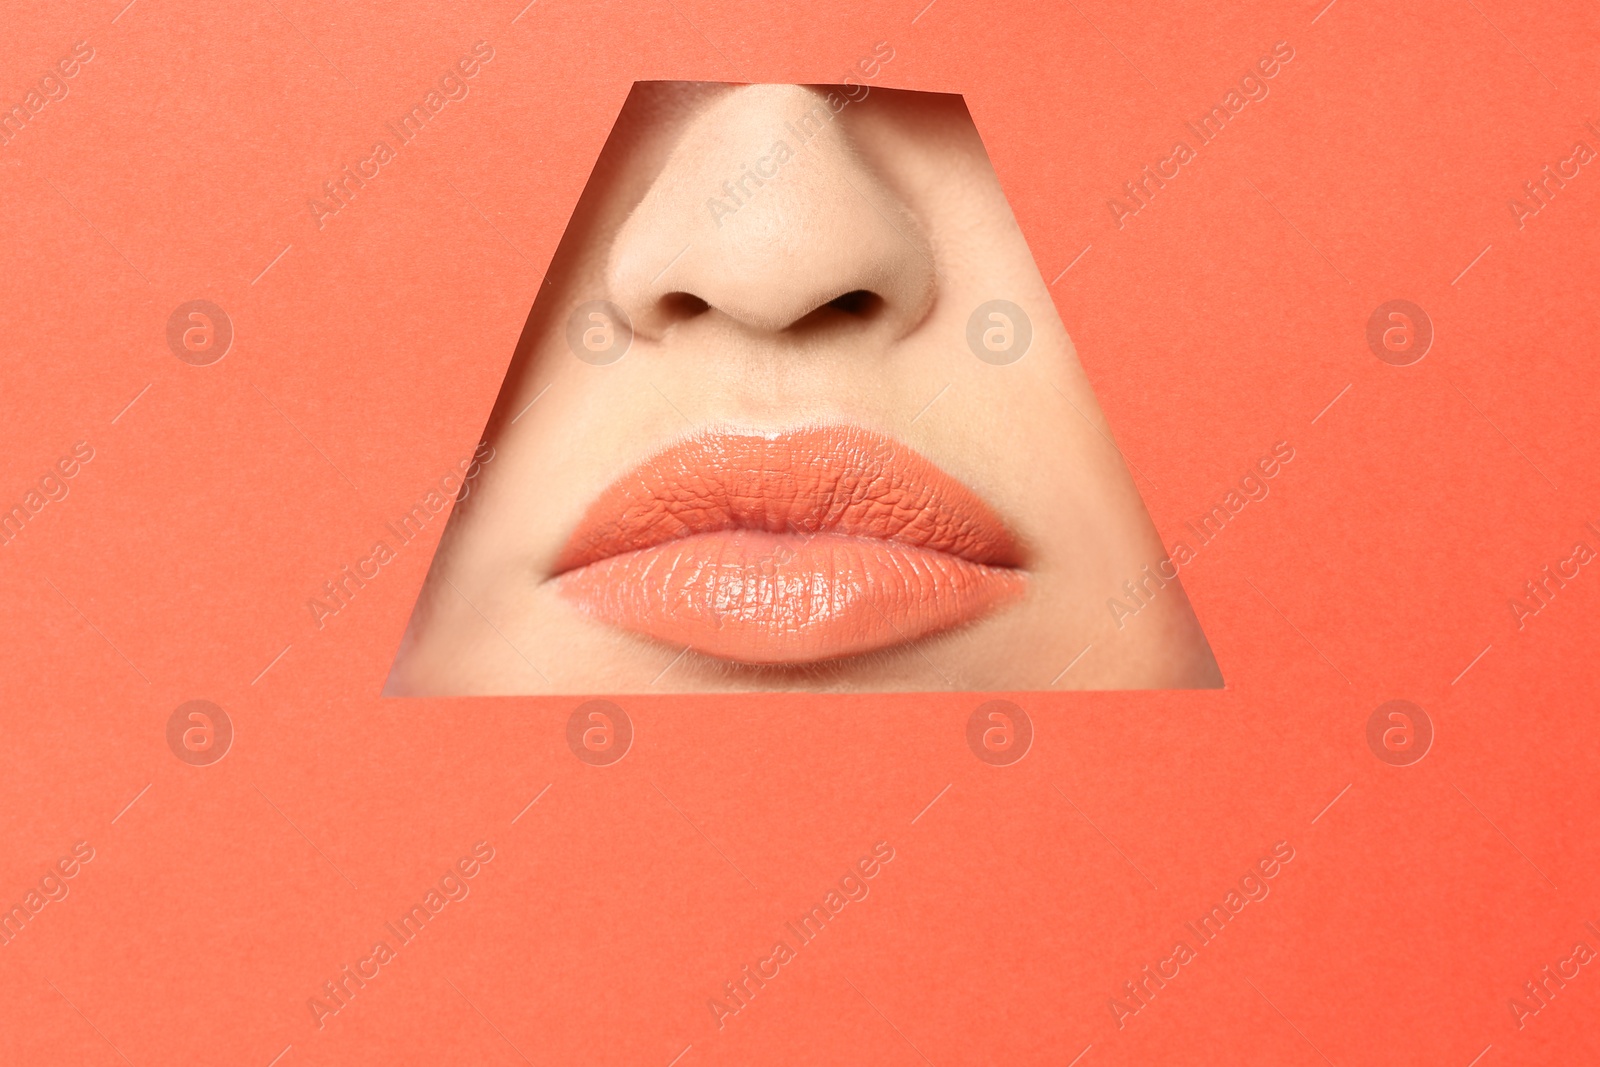 Photo of Lips of young woman with beautiful lipstick visible through hole in color paper